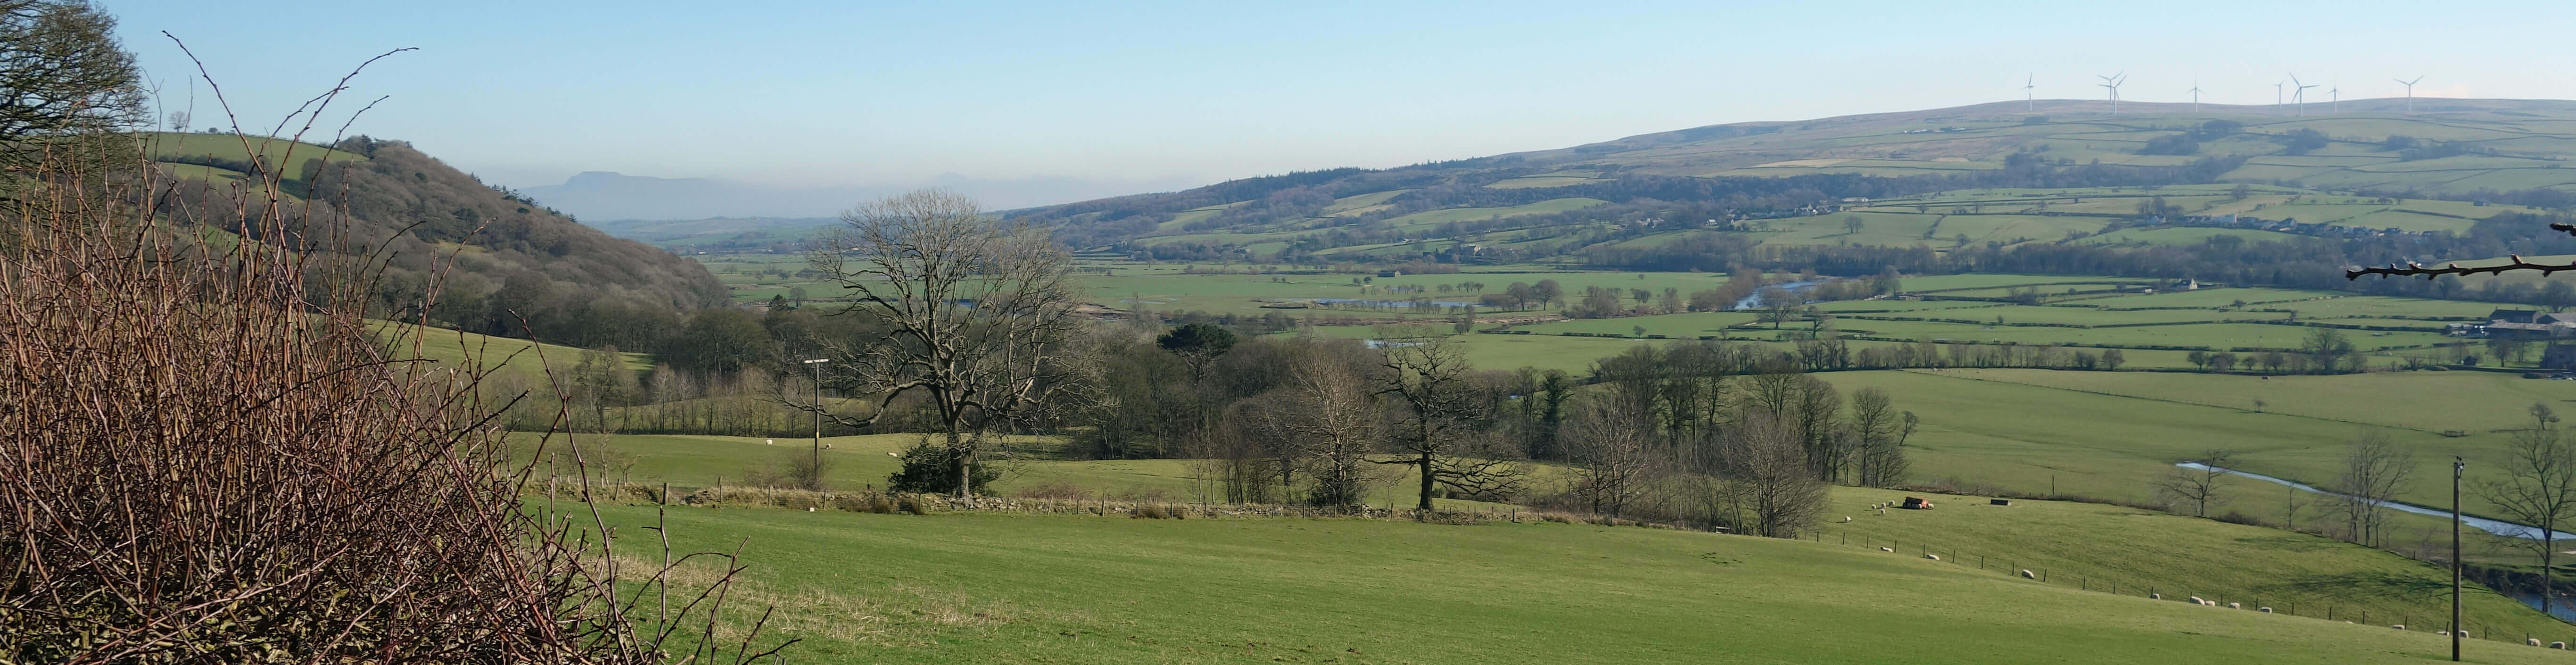 lune valley